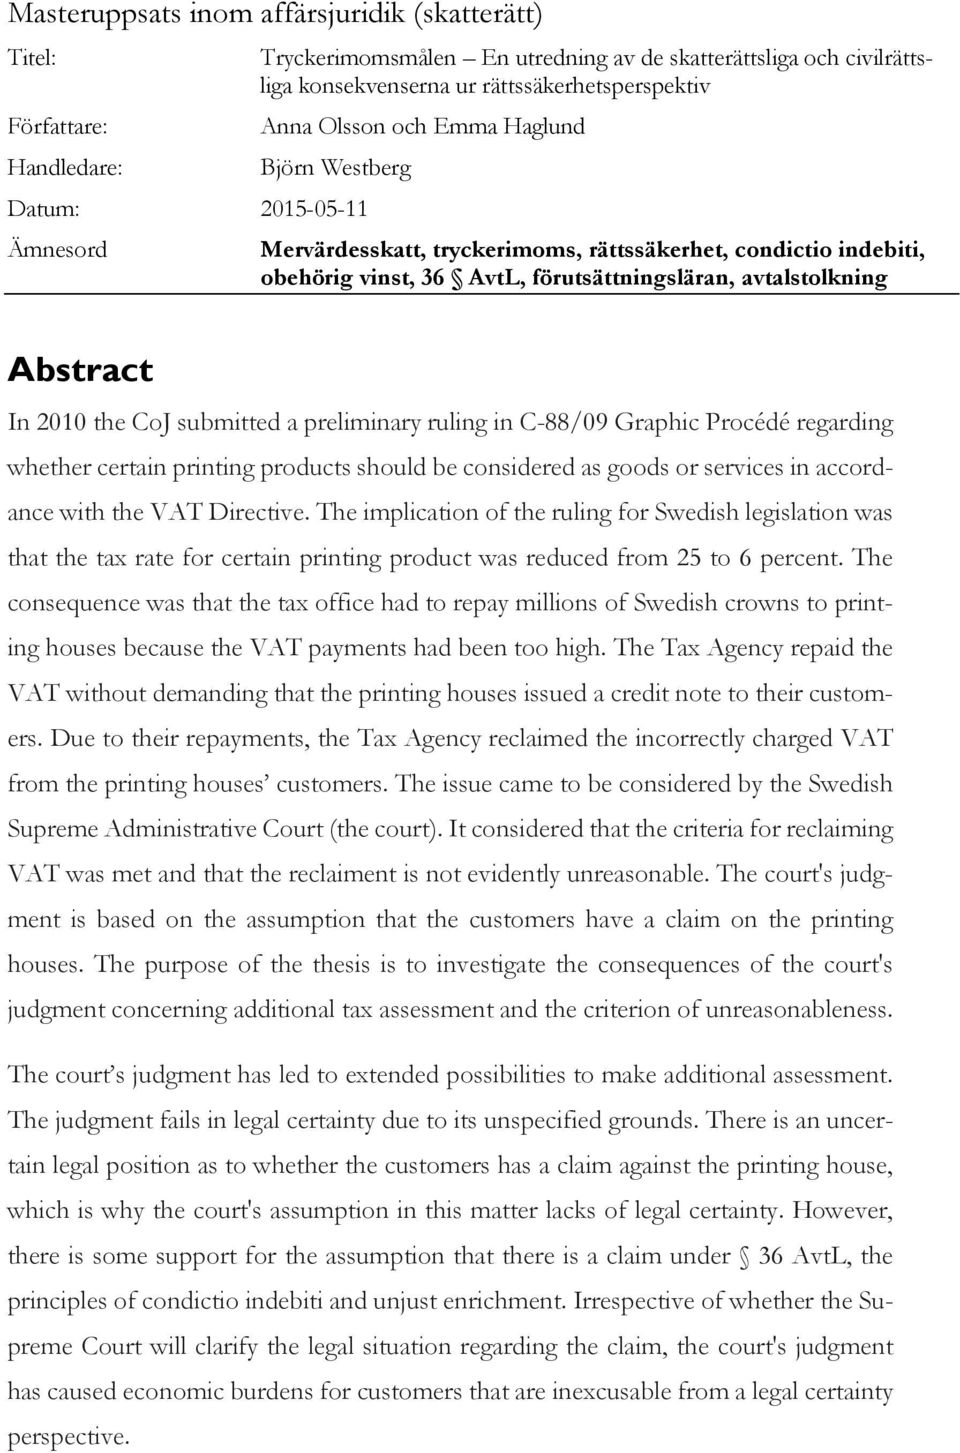 Abstract In 2010 the CoJ submitted a preliminary ruling in C-88/09 Graphic Procédé regarding whether certain printing products should be considered as goods or services in accordance with the VAT